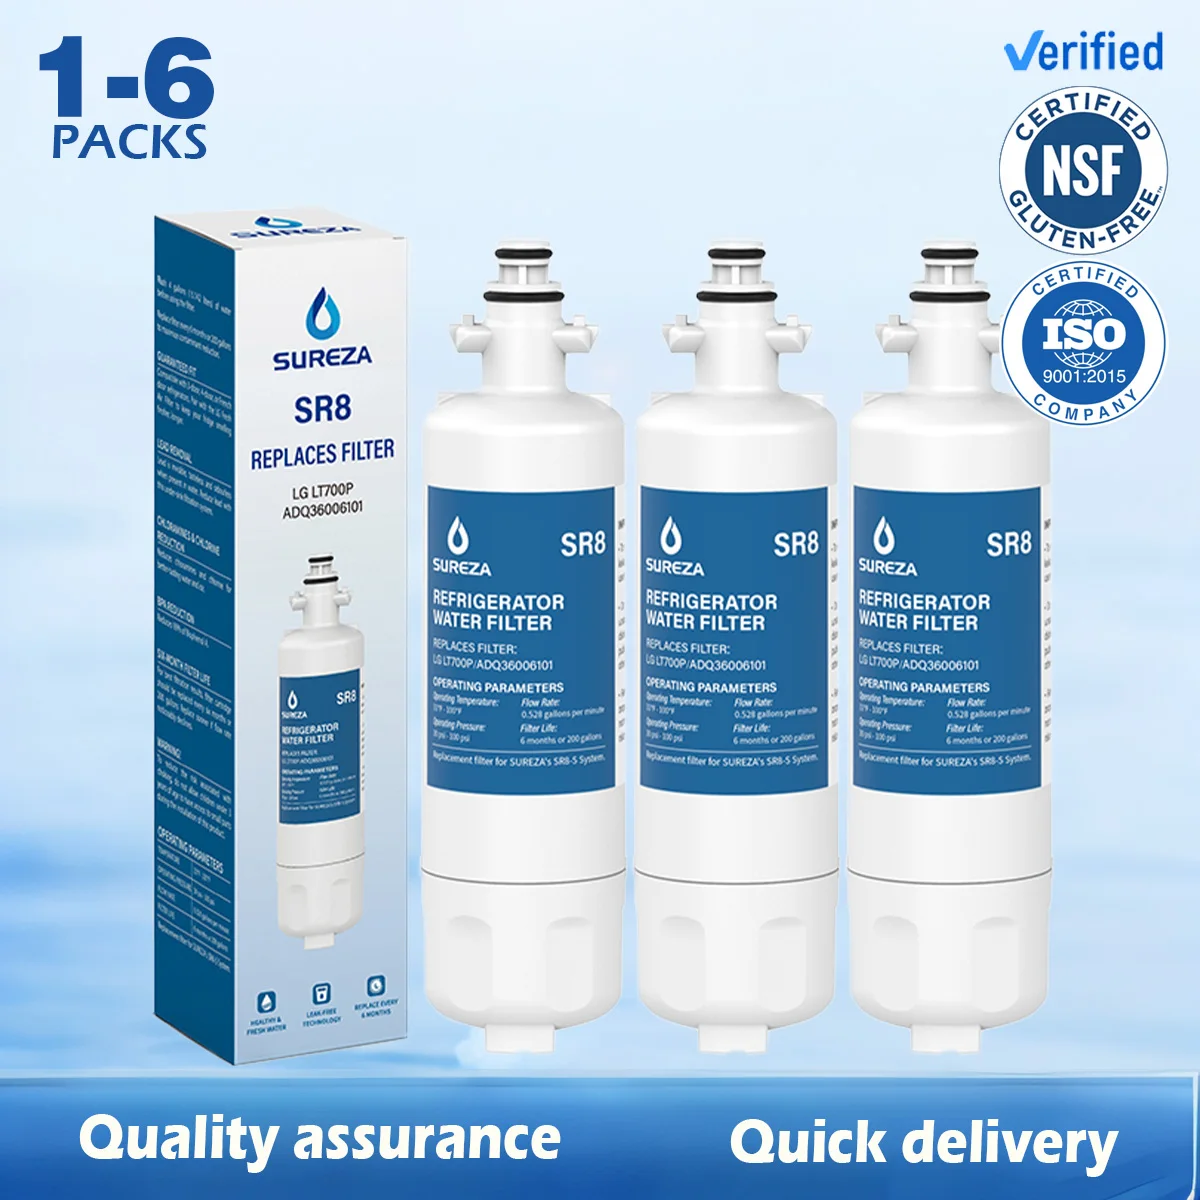 

Repalce LG LT700P ADQ36006101 Kenmore 9690 Refrigerator Water Filter Replacement, Compatible with ADQ36006102 RWF1200A, 1-6Pcs